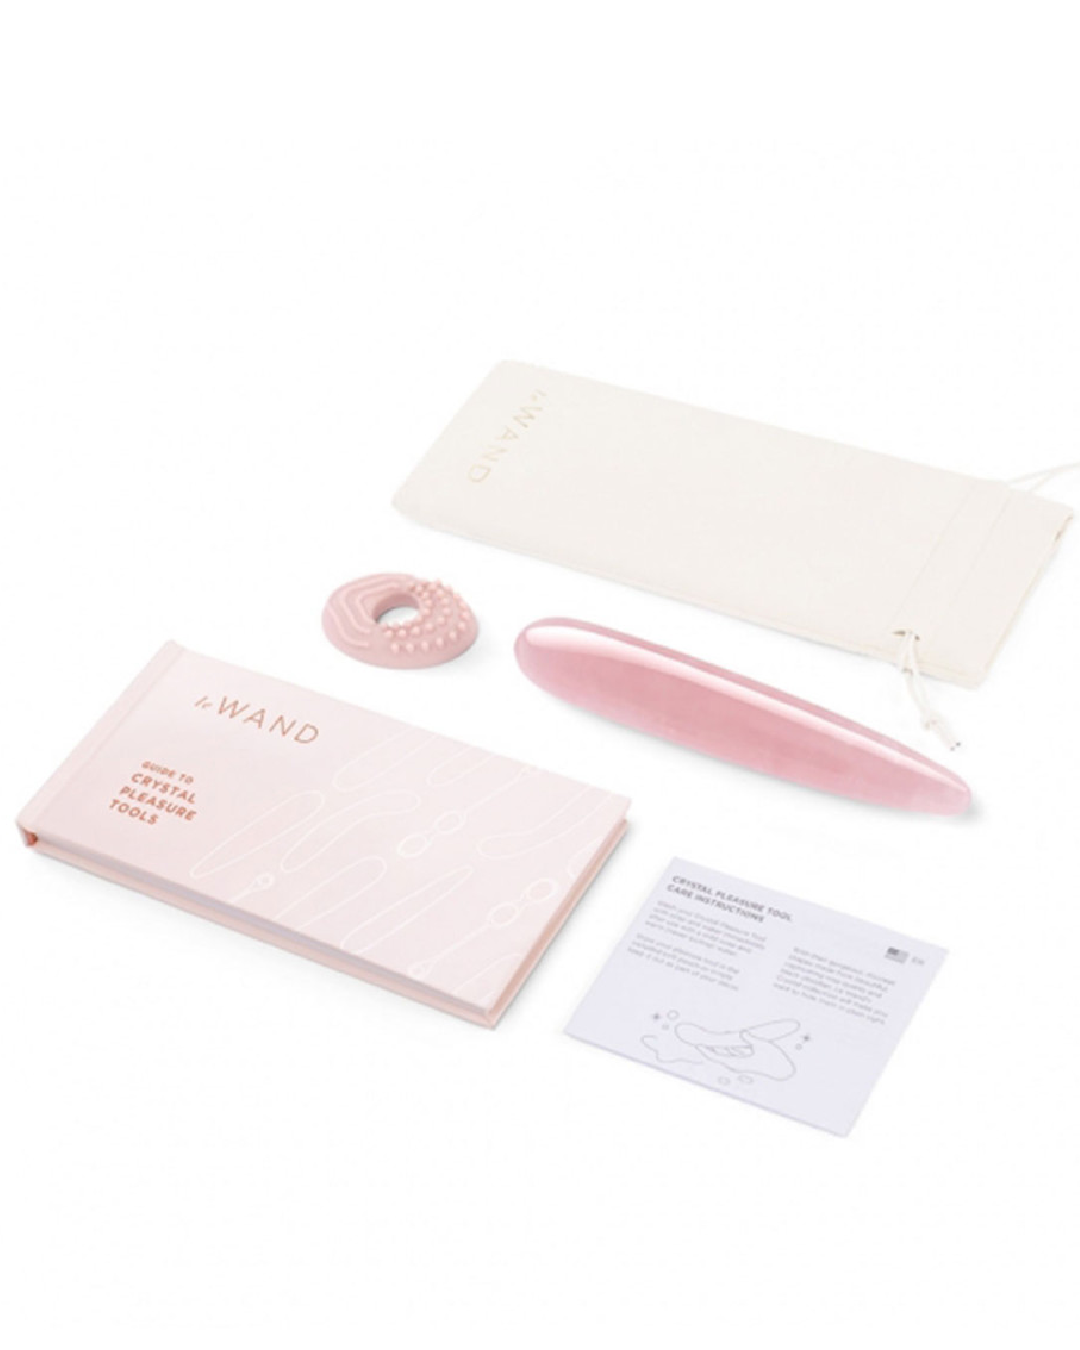 Le Wand Crystal Slim  Wand - Rose Quartz with silicone ring, storage pouch and user manual 